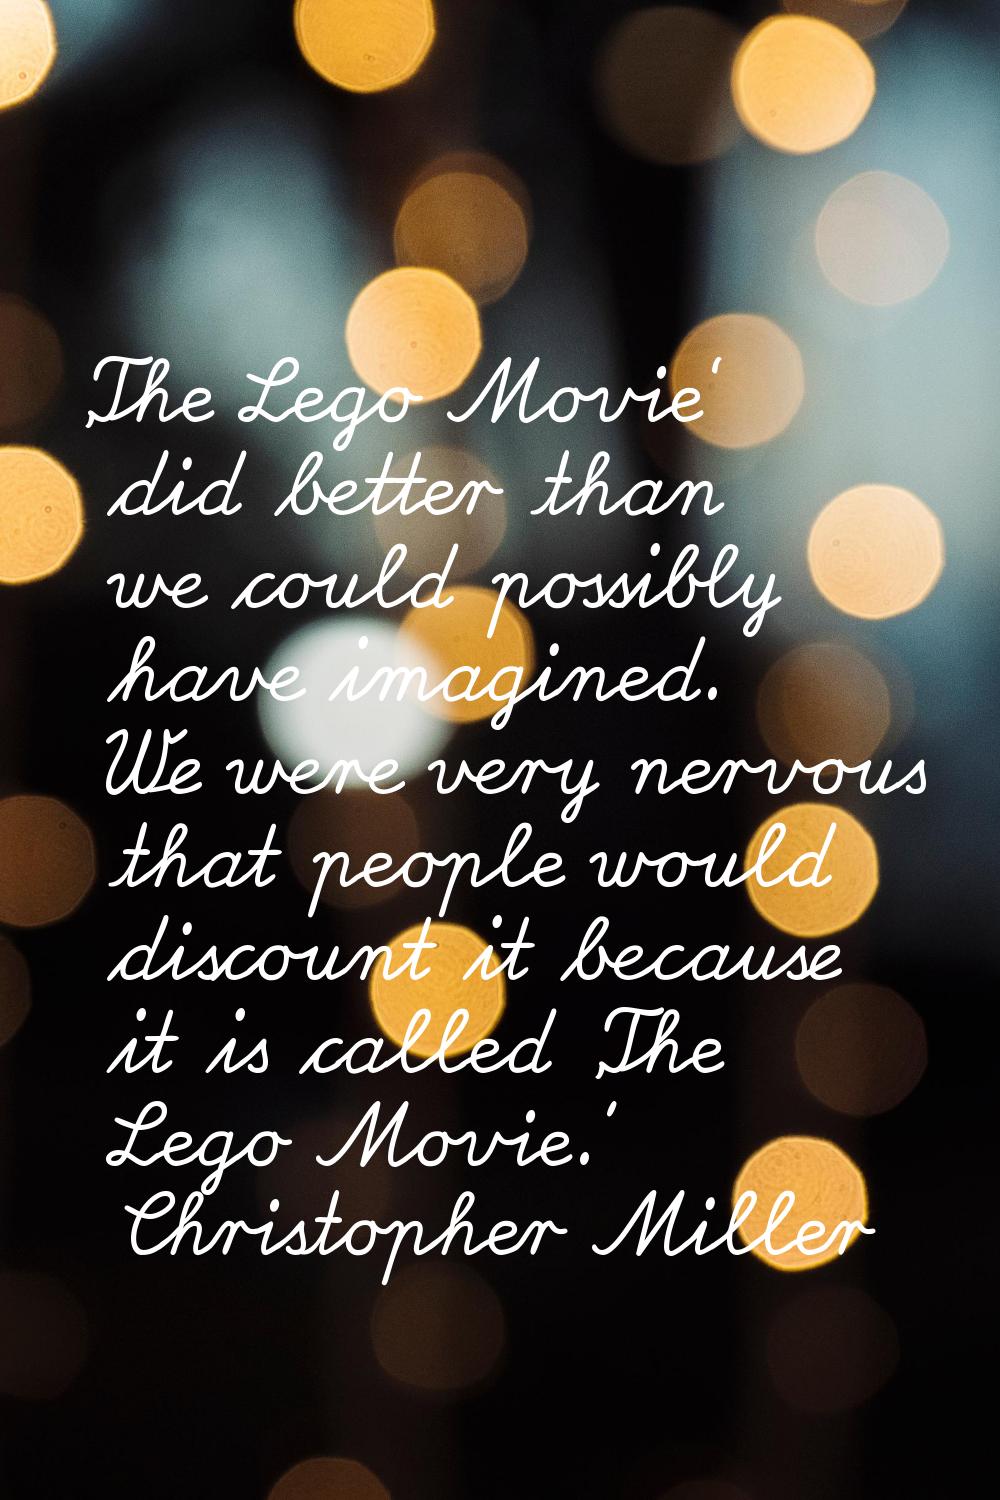 'The Lego Movie' did better than we could possibly have imagined. We were very nervous that people 